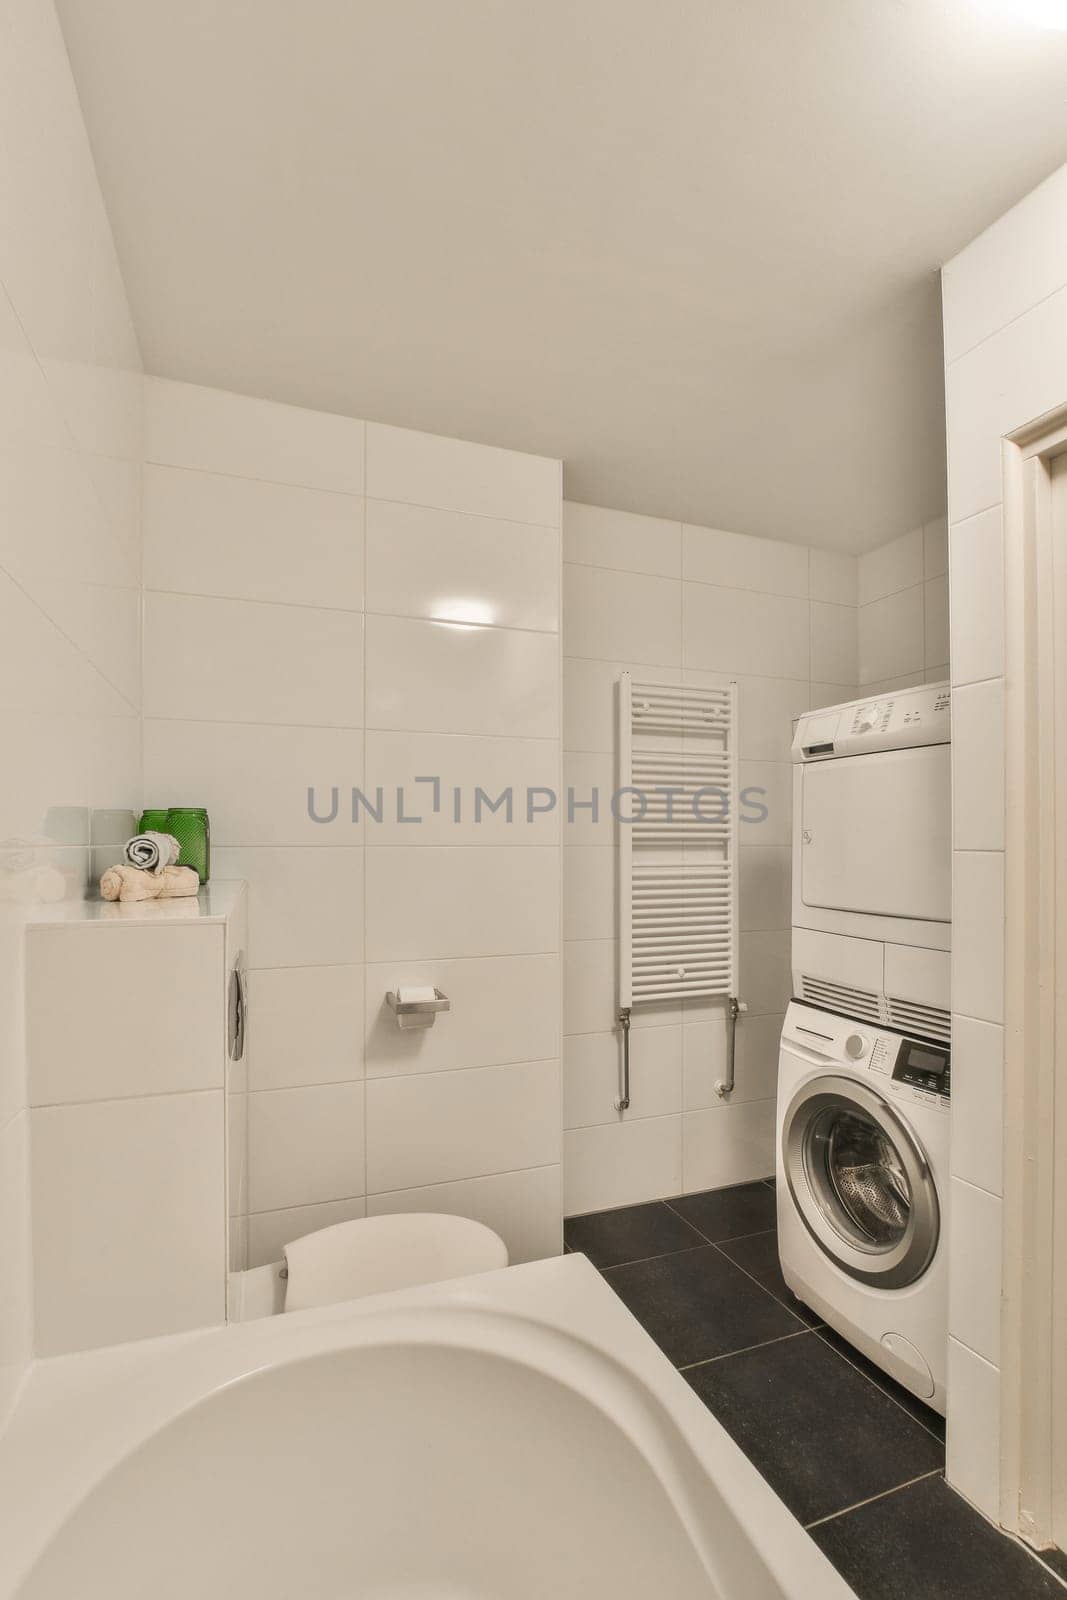 a laundry room with a washer and dryer in the corner, next to a bathtub on the floor